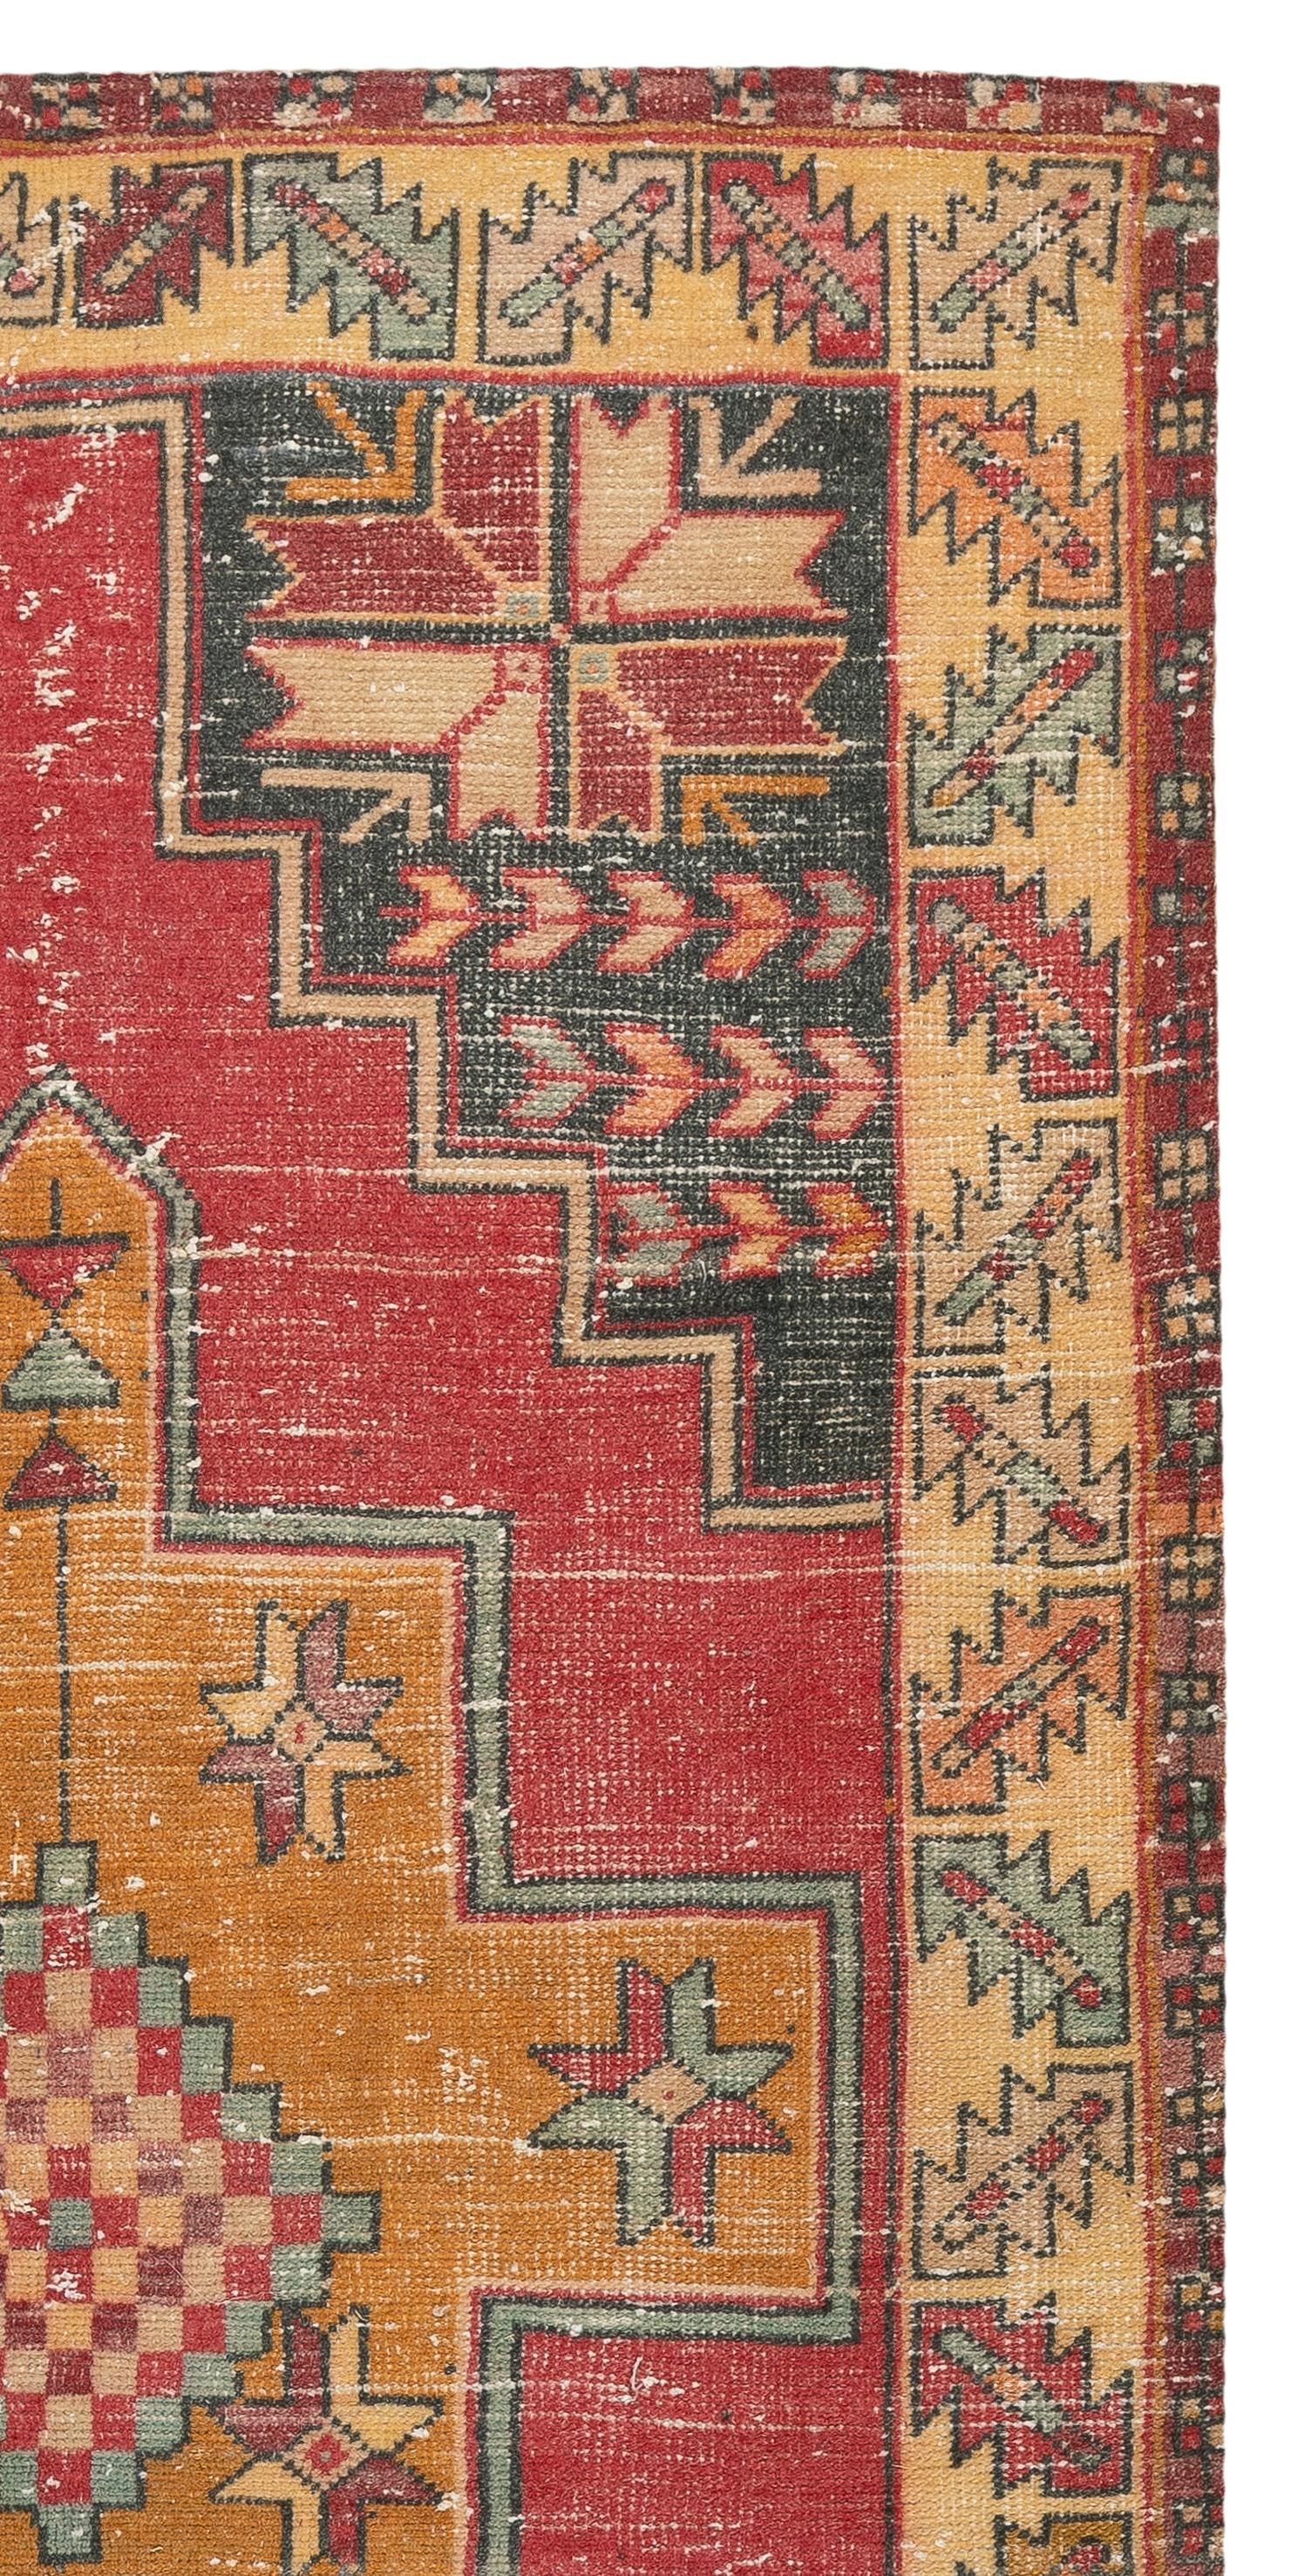 A vintage village rug from Turkey. It features multiple medallions against in saturated gold with light blue borders against a red field and large corner pieces and a main border featuring geometric star and leaf motifs. Finely hand-knotted with